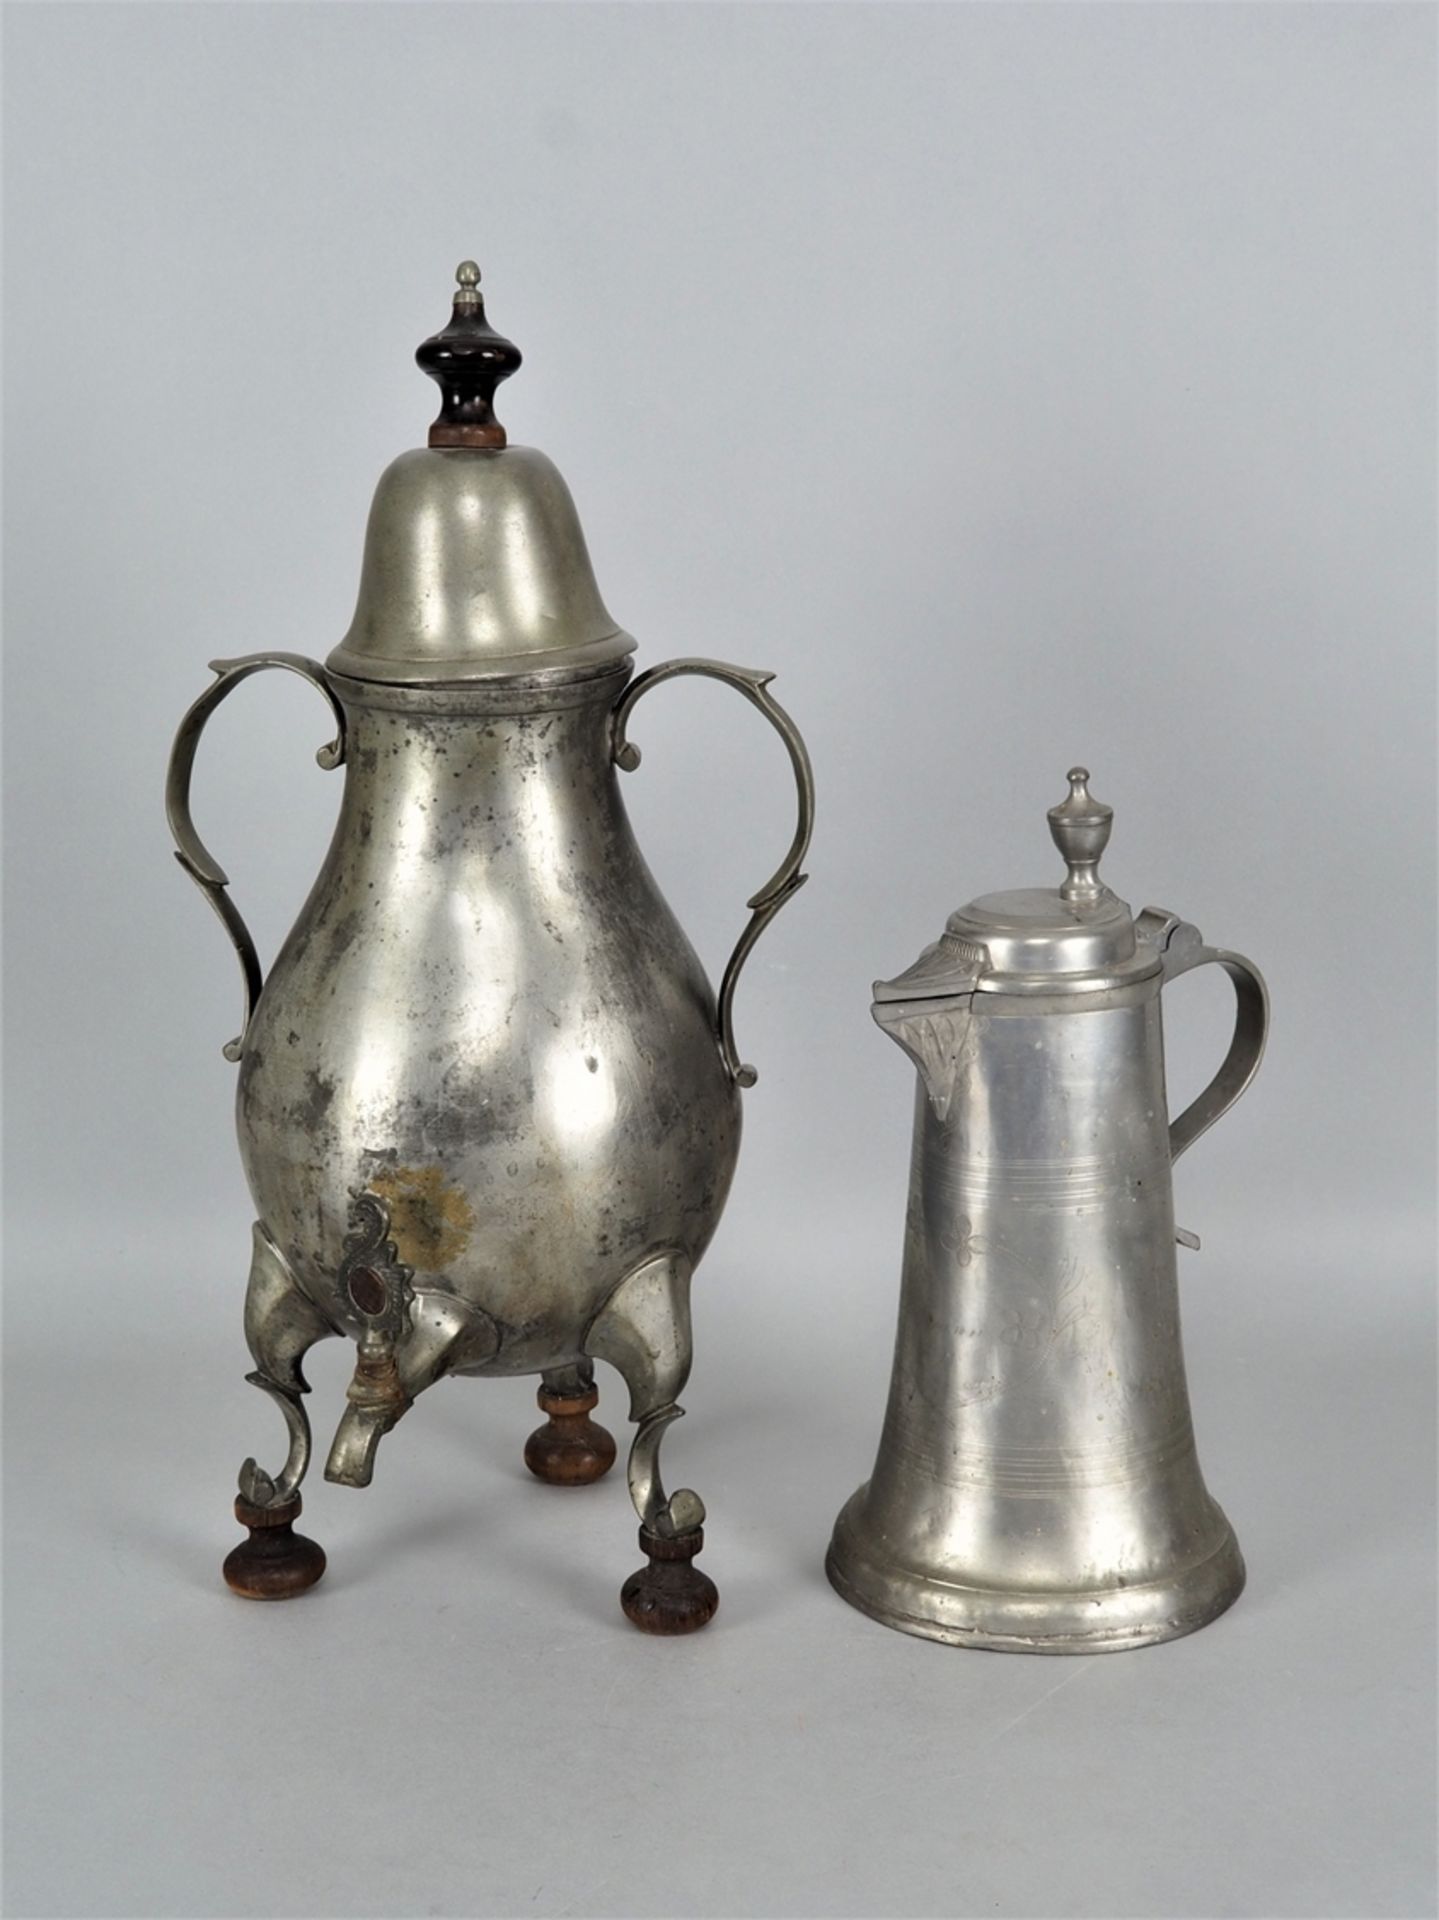 Set of pewter vessels, mid-19th century.